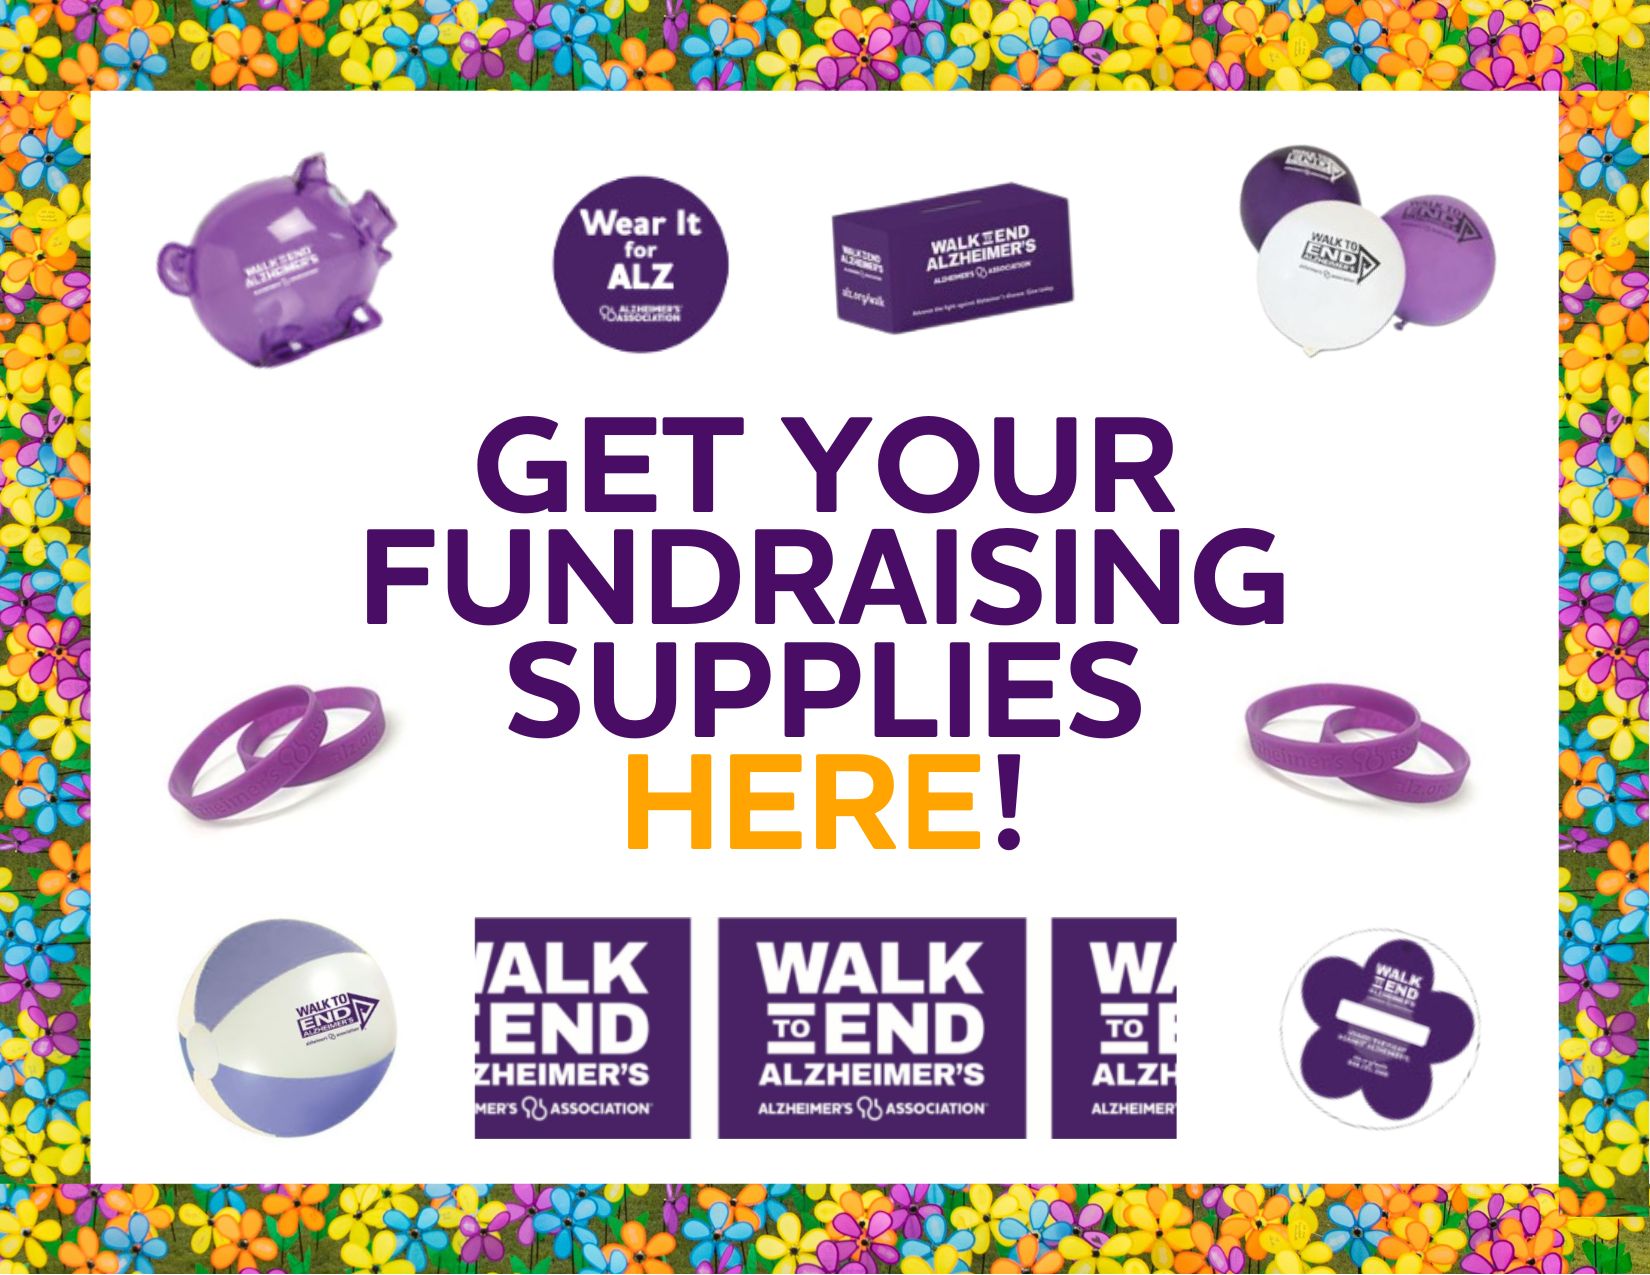 GET YOUR FUNDRAISING SUPPLIES HERE!.jpg